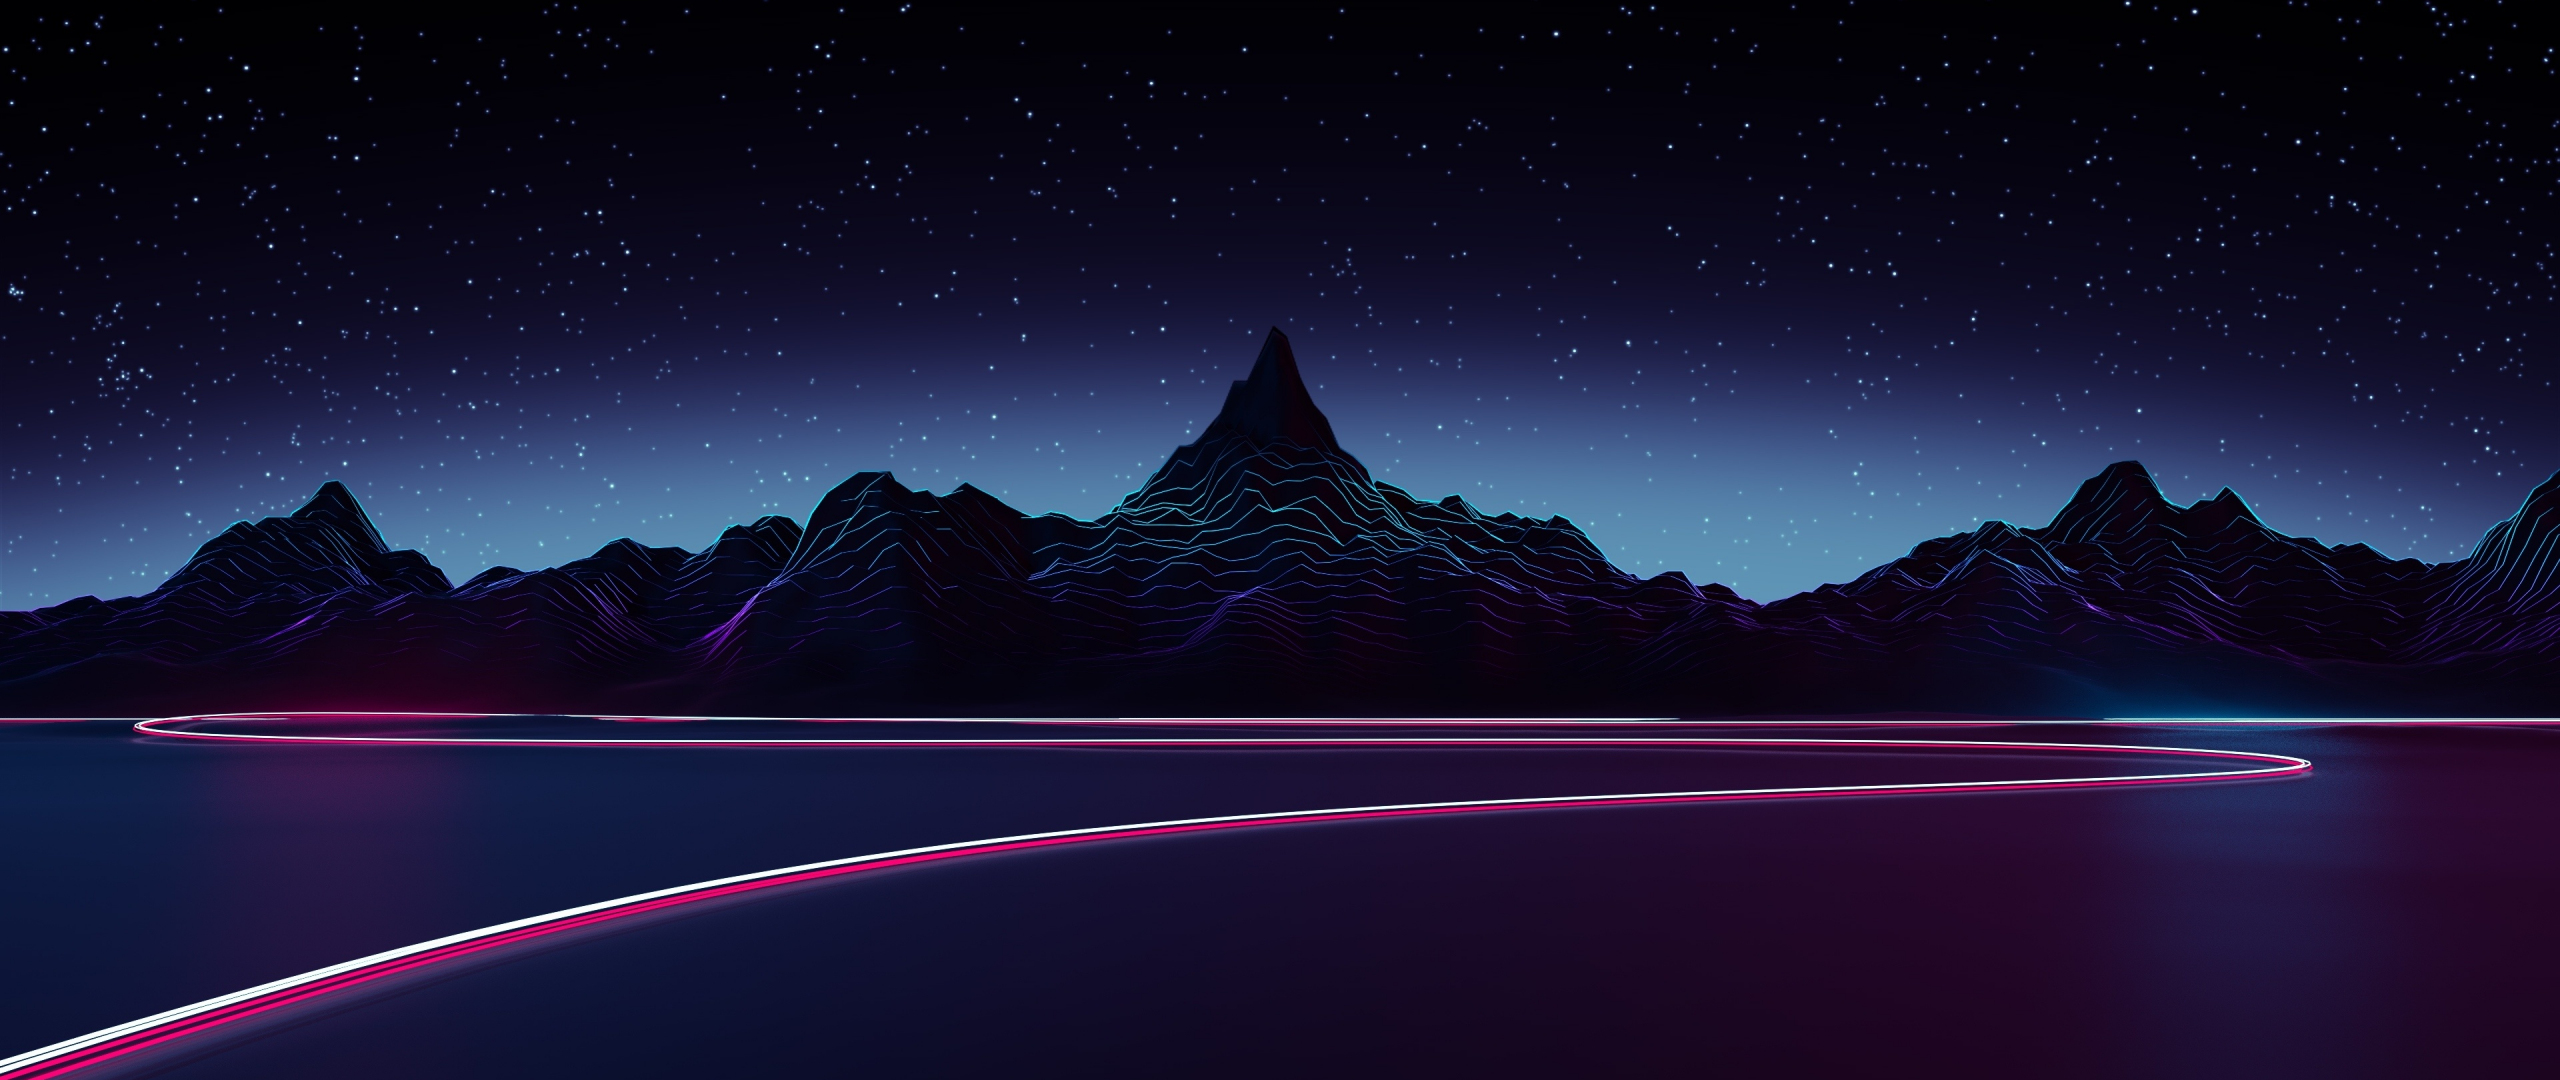 Download 2560x1080 Wallpaper Silhouette Mountains Artwork Synthwave Dual Wide Widescreen 2560x1080 Hd Image Background